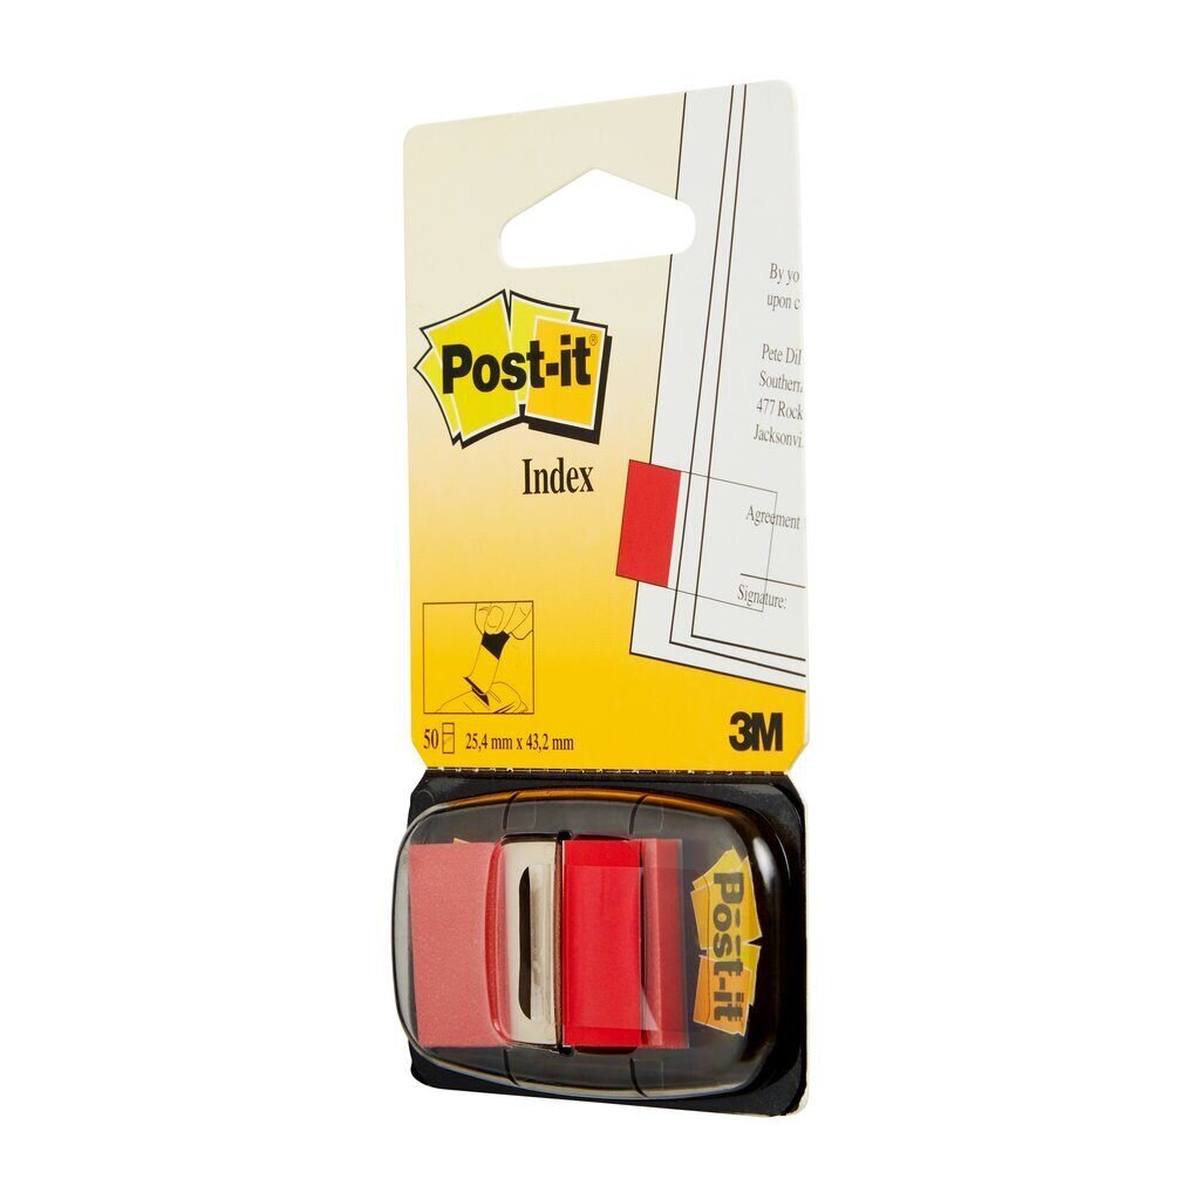 3M Post-it Index I680-1, 25.4 mm x 43.2 mm, red, 1 x 50 adhesive strips in dispenser